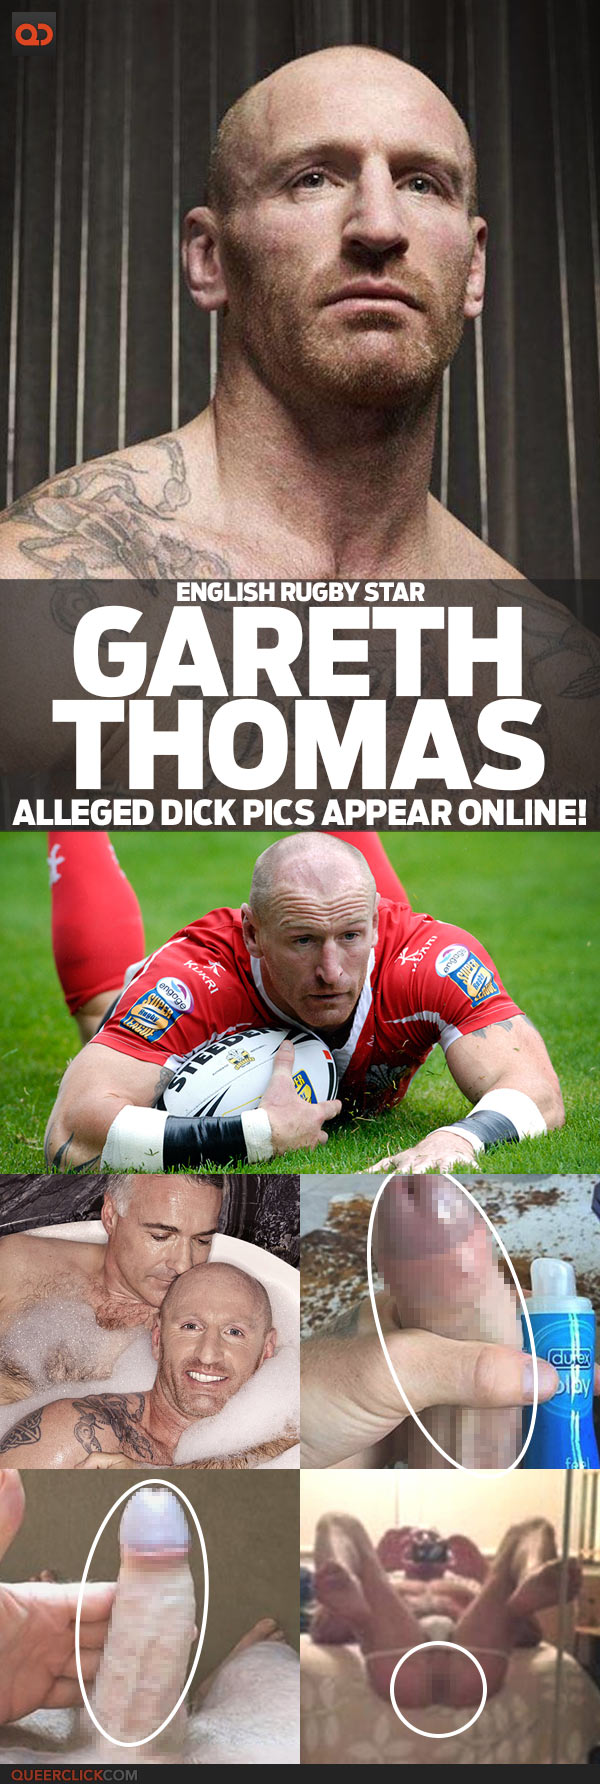 Gareth Thomas, English Rugby Star, Alleged Dick Pics Appear Online!